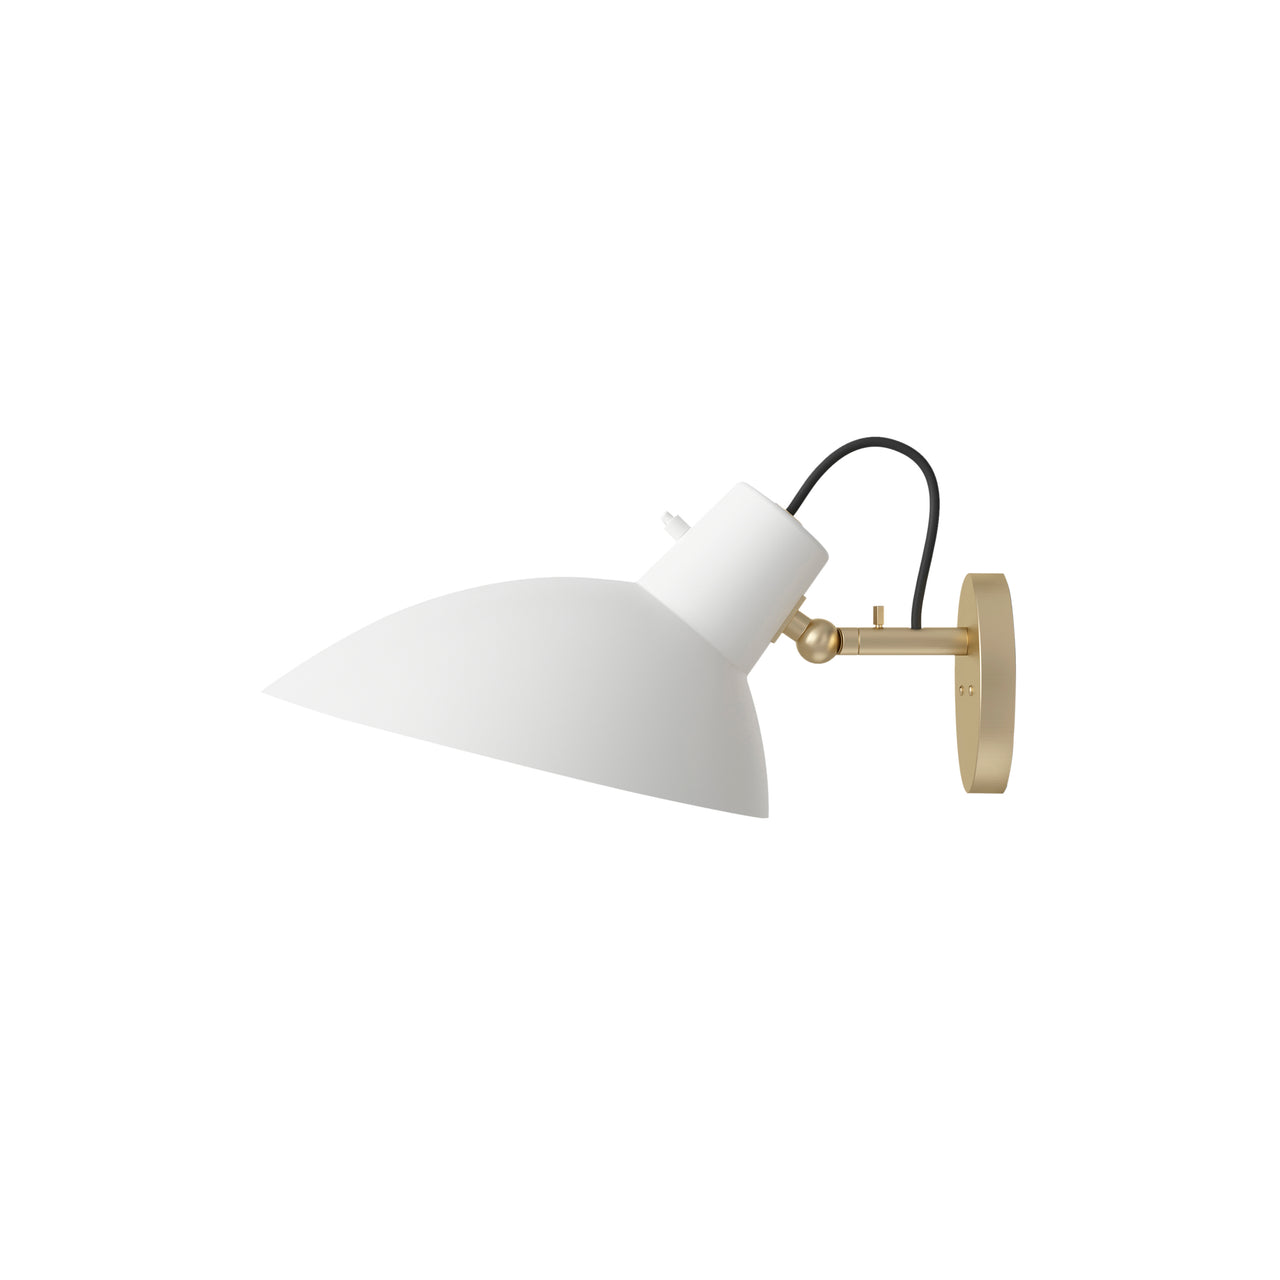 VV Cinquanta Wall Lamp with Switch: Brass + White